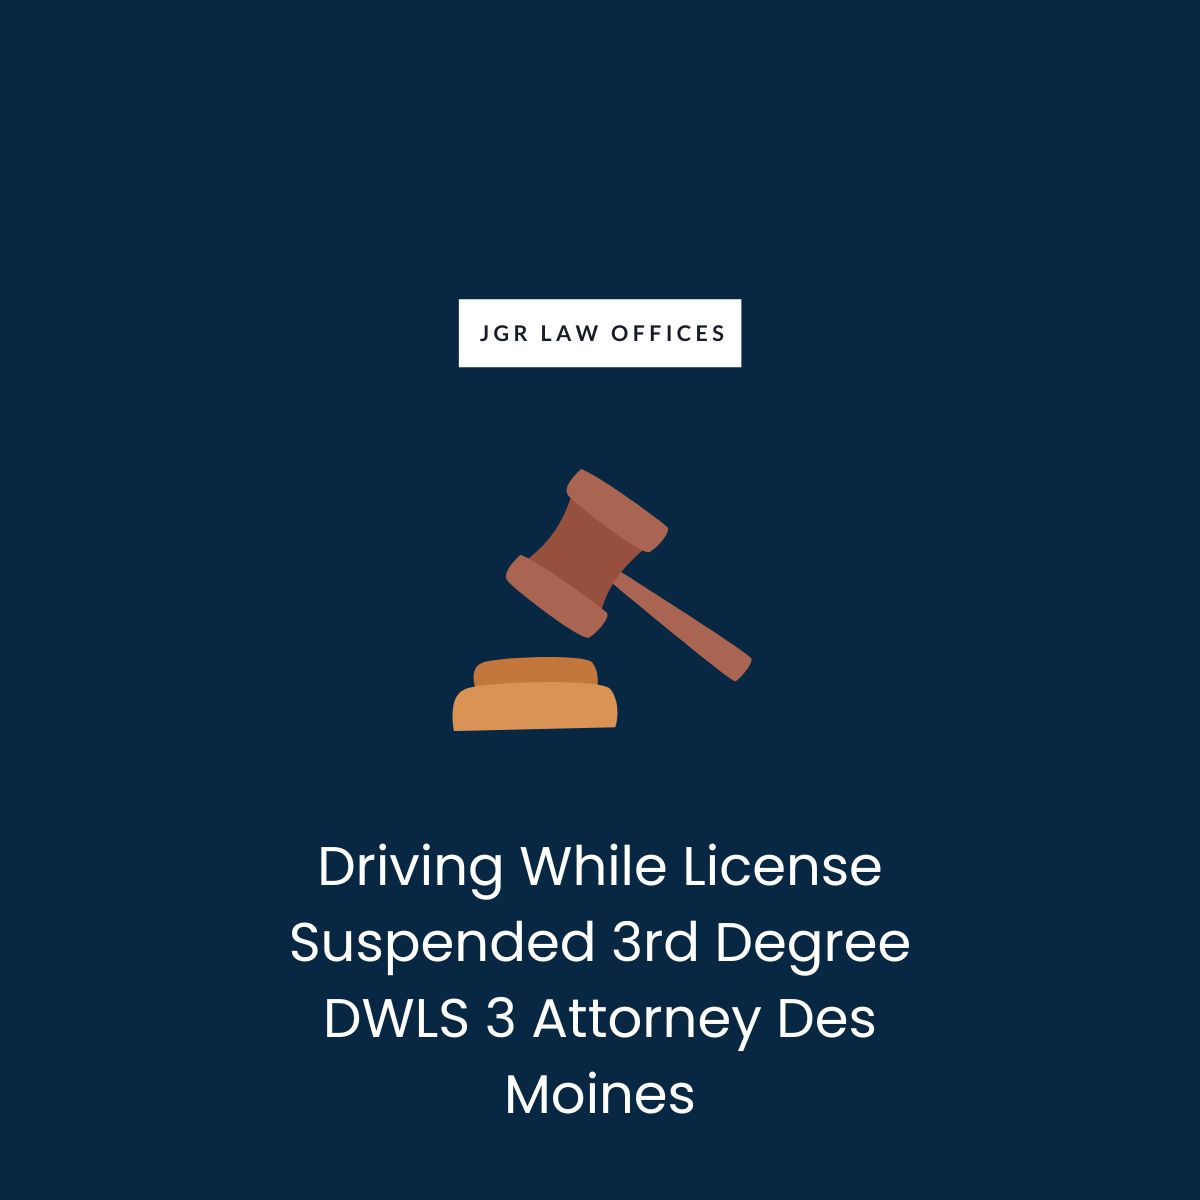 Driving While License Suspended 3rd Degree DWLS 3 Attorney Des Moines